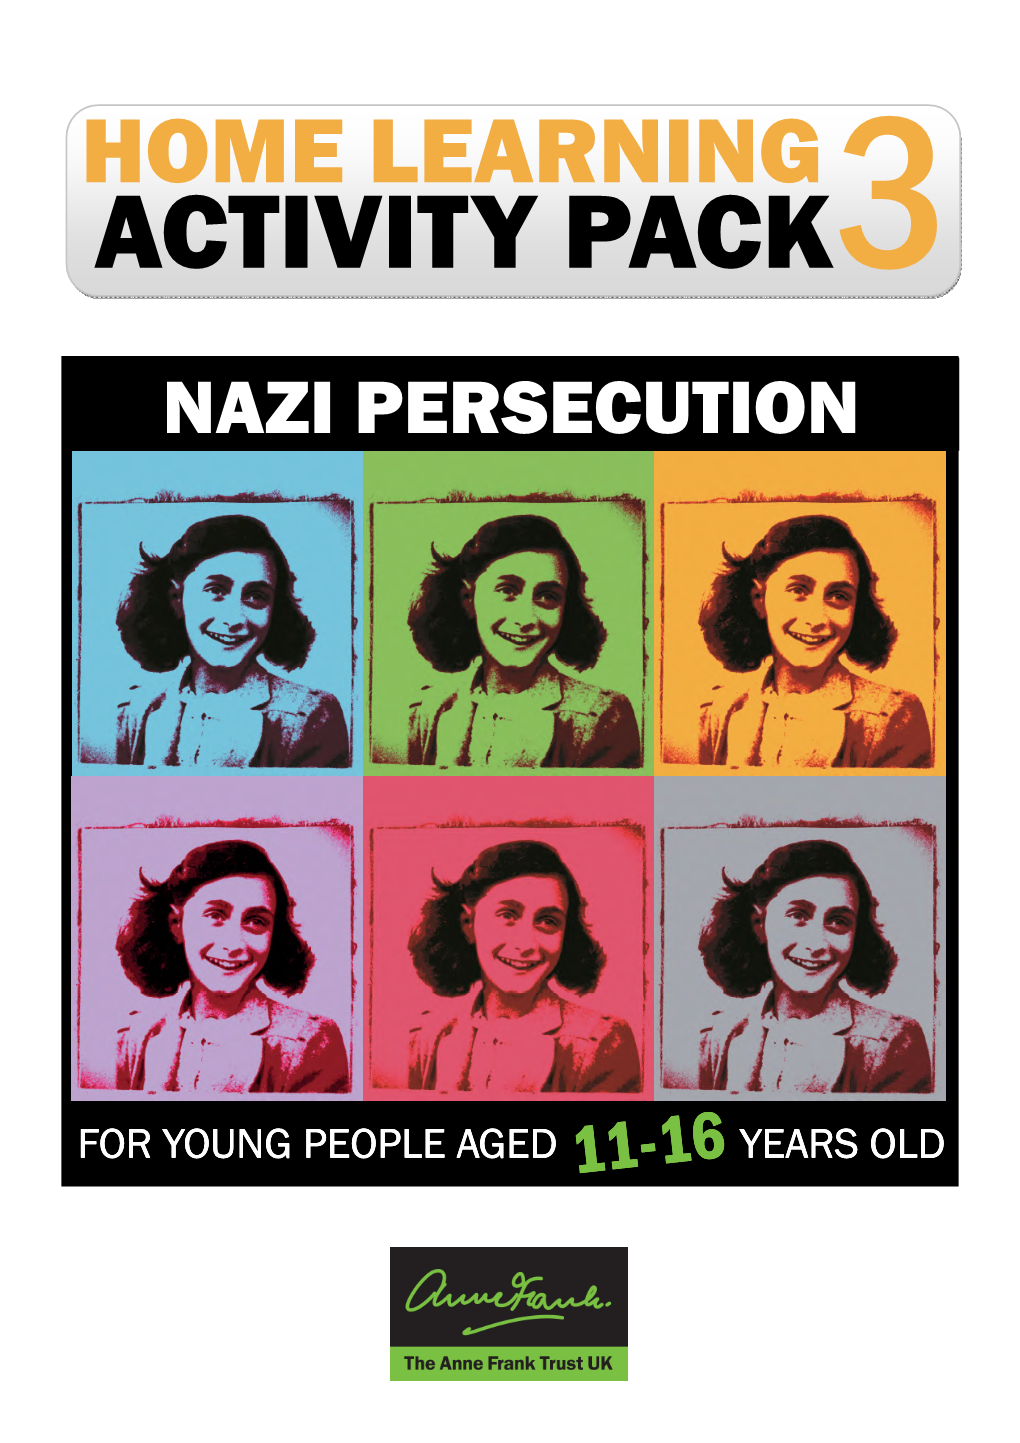 Activity Pack 3